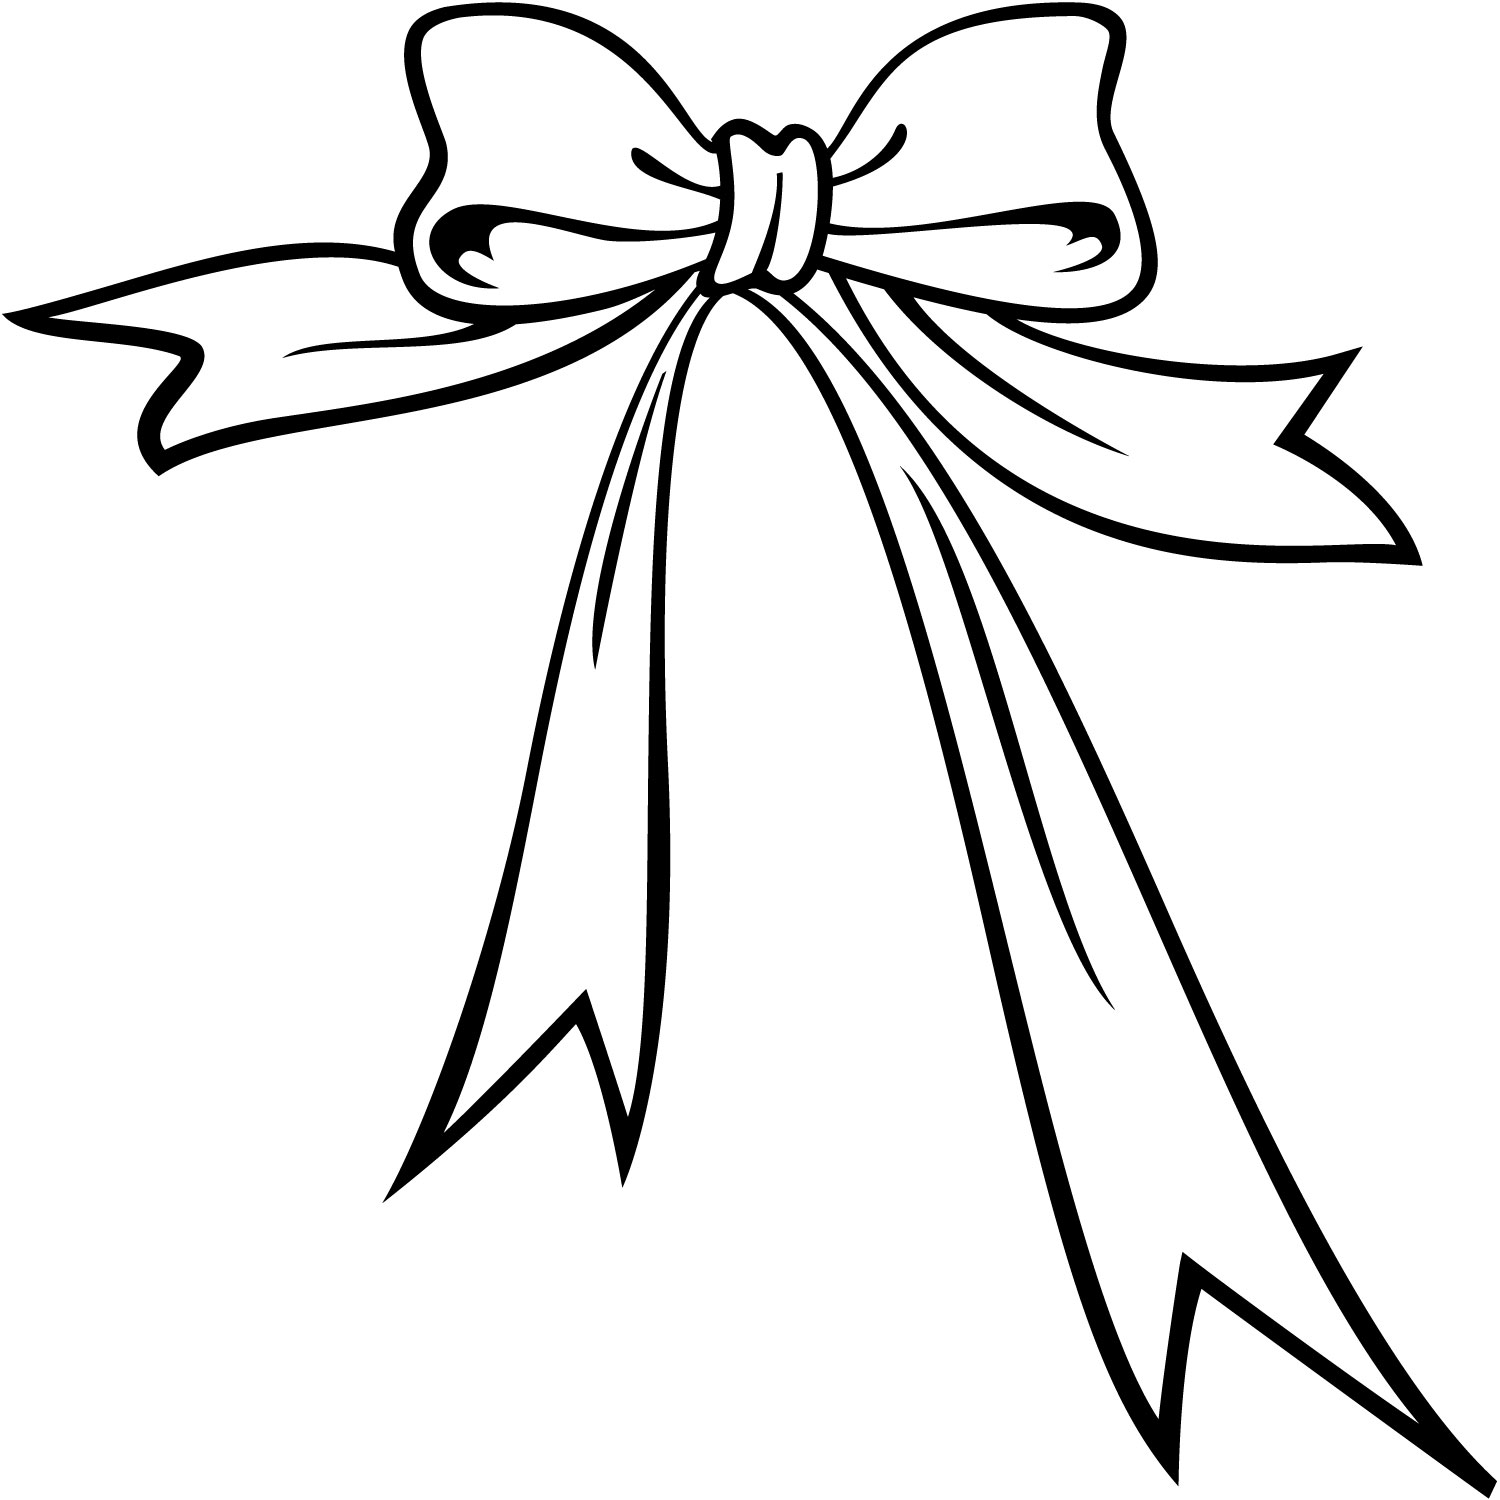 13 Vector Bow Free Cliparts That You Can Download To You Computer And